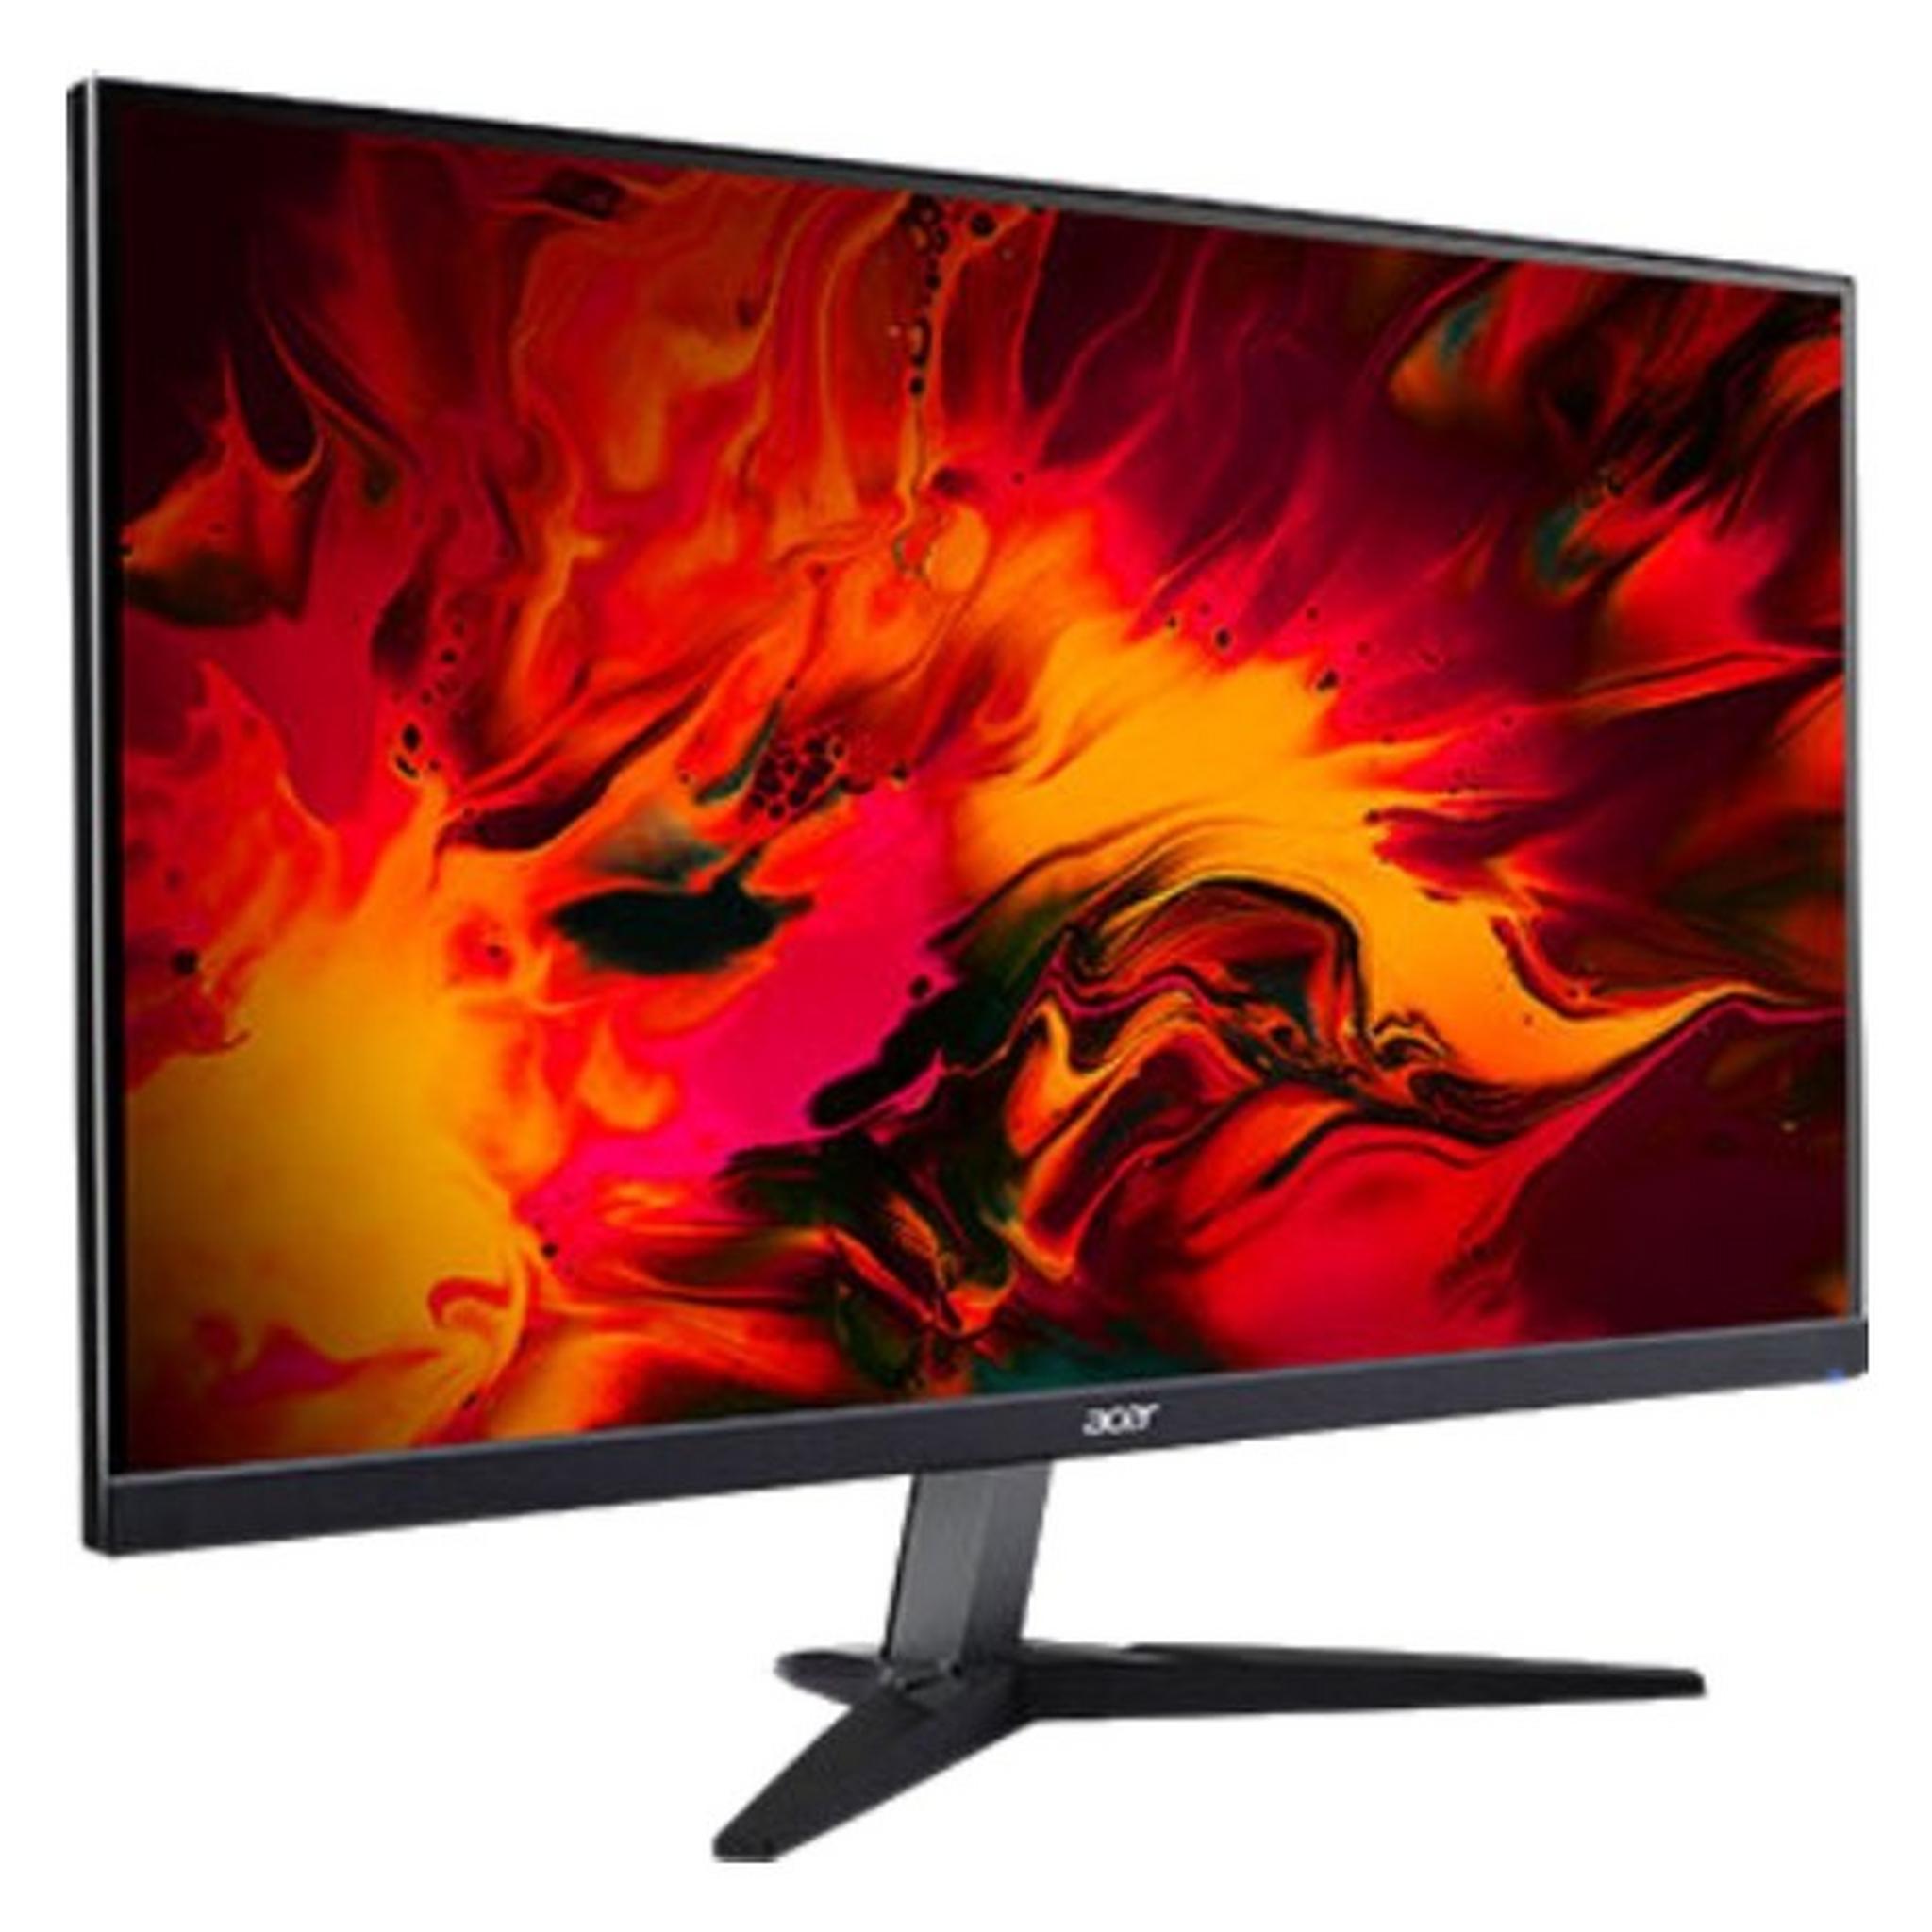 Acer Nitro FHD 24.5-inch Gaming Monitor